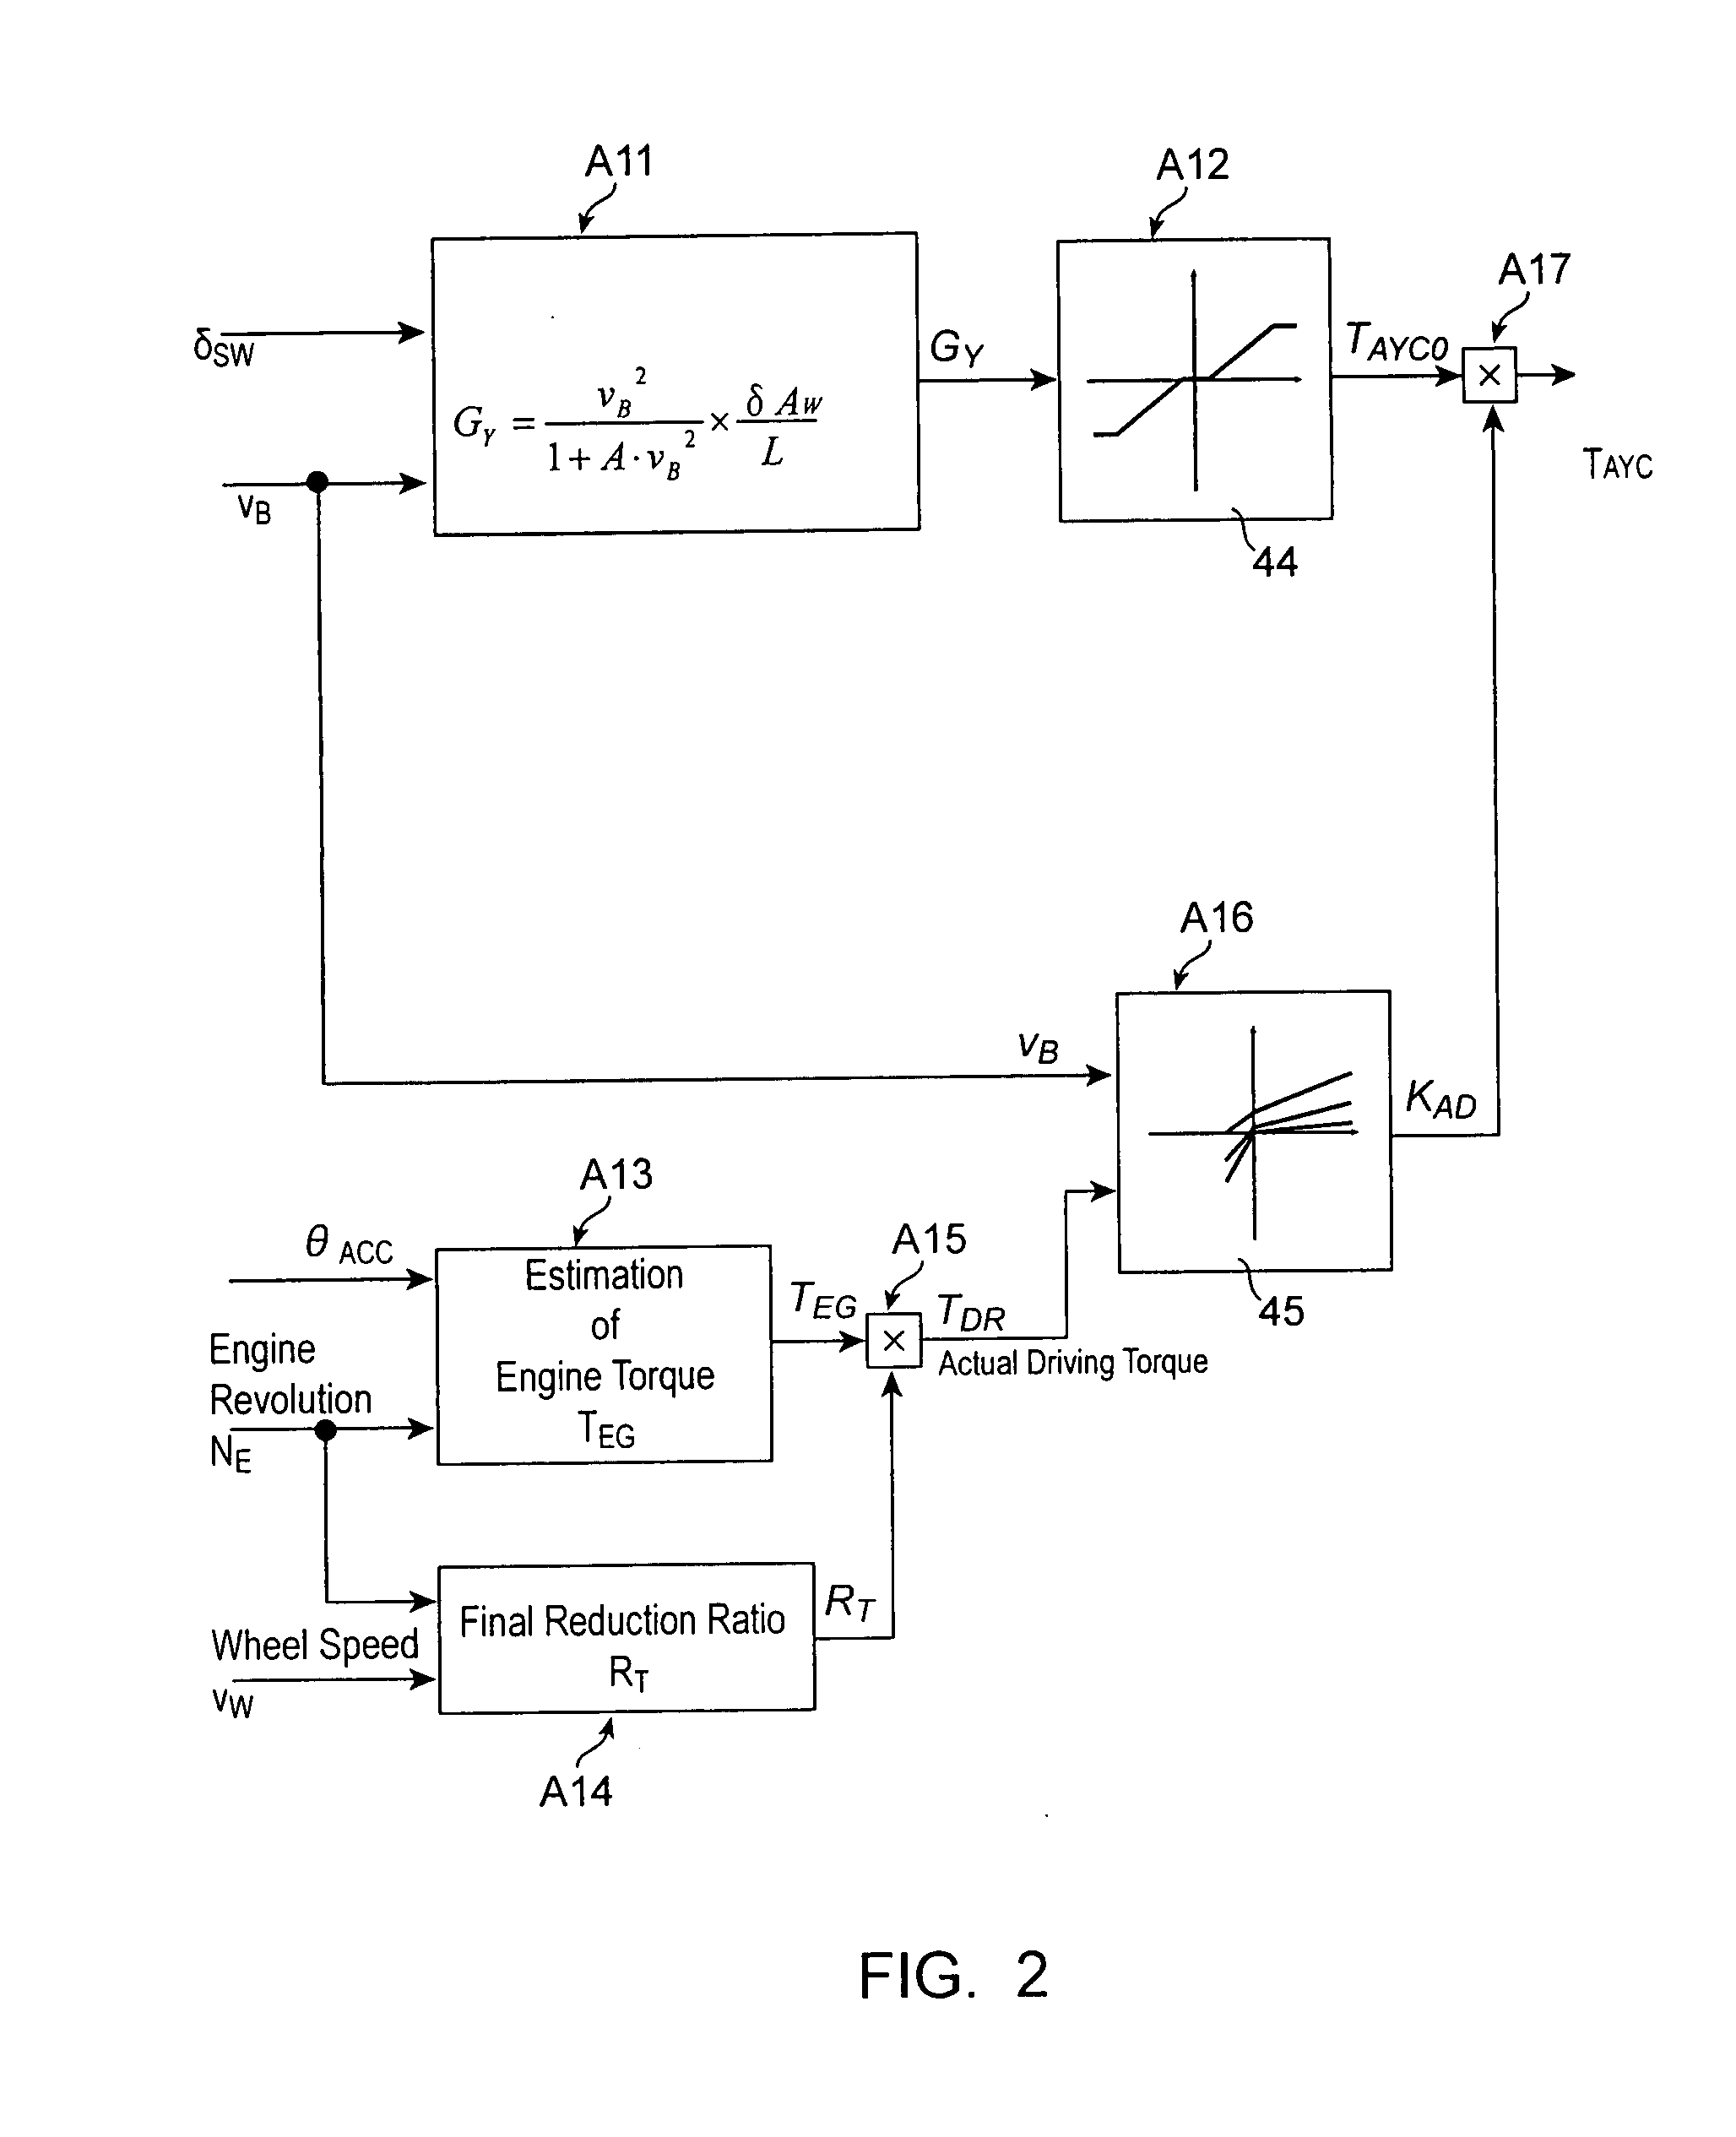 Turning control apparatus for vehicle